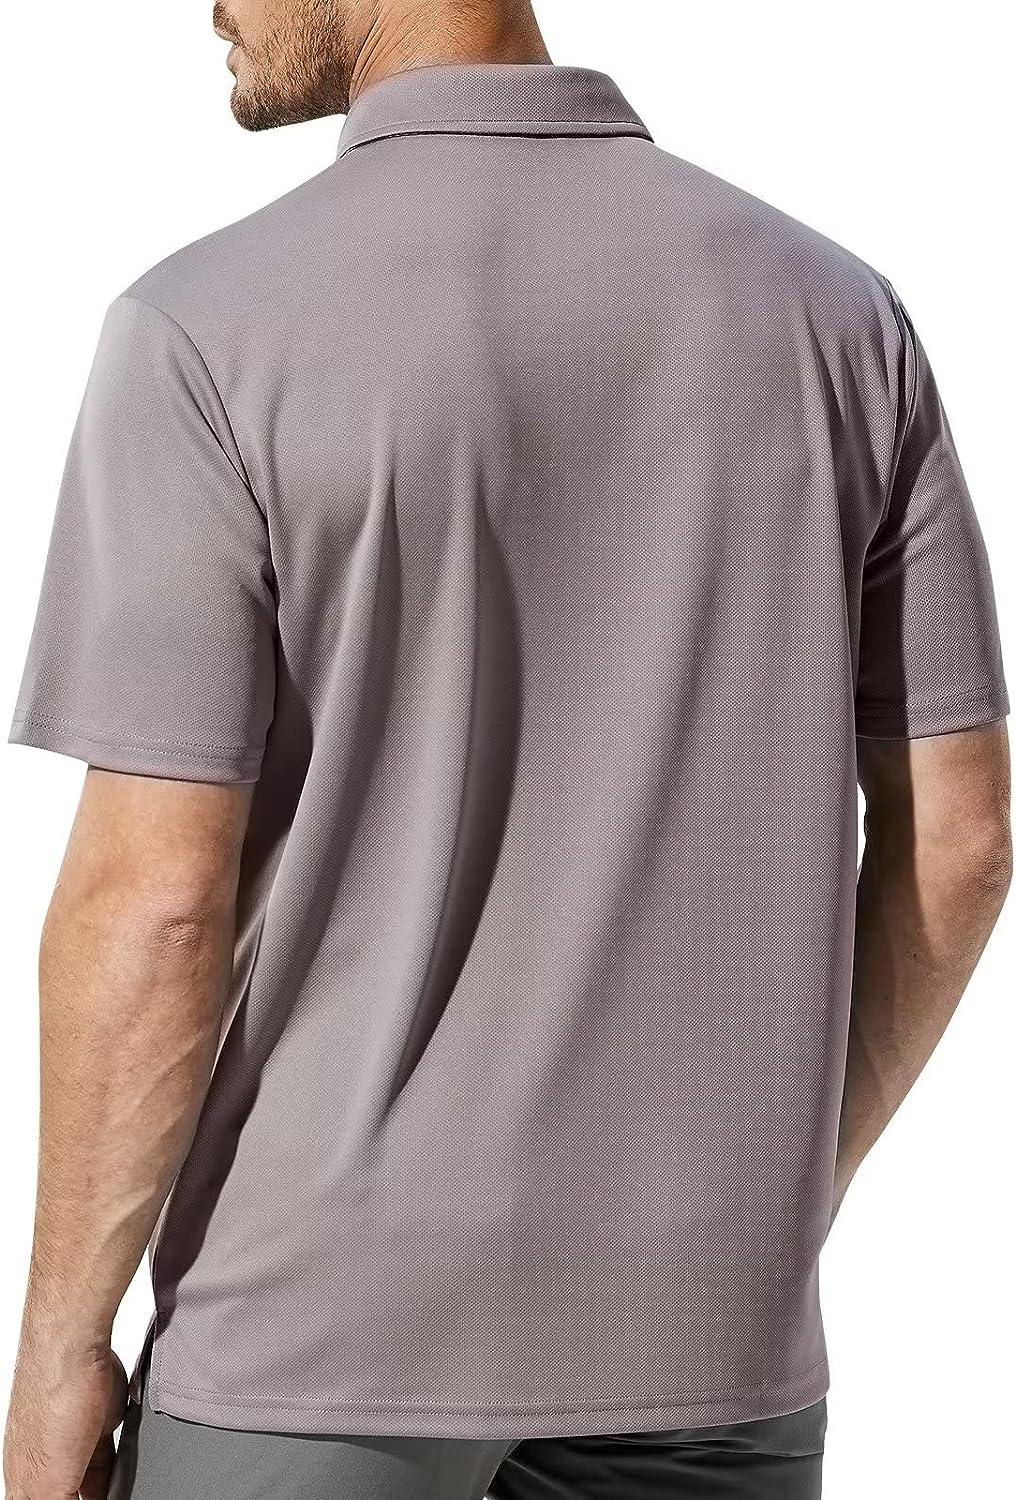 Haimont Men's Dry Fit Athletic Shirts Moisture Wicking T-Shirts